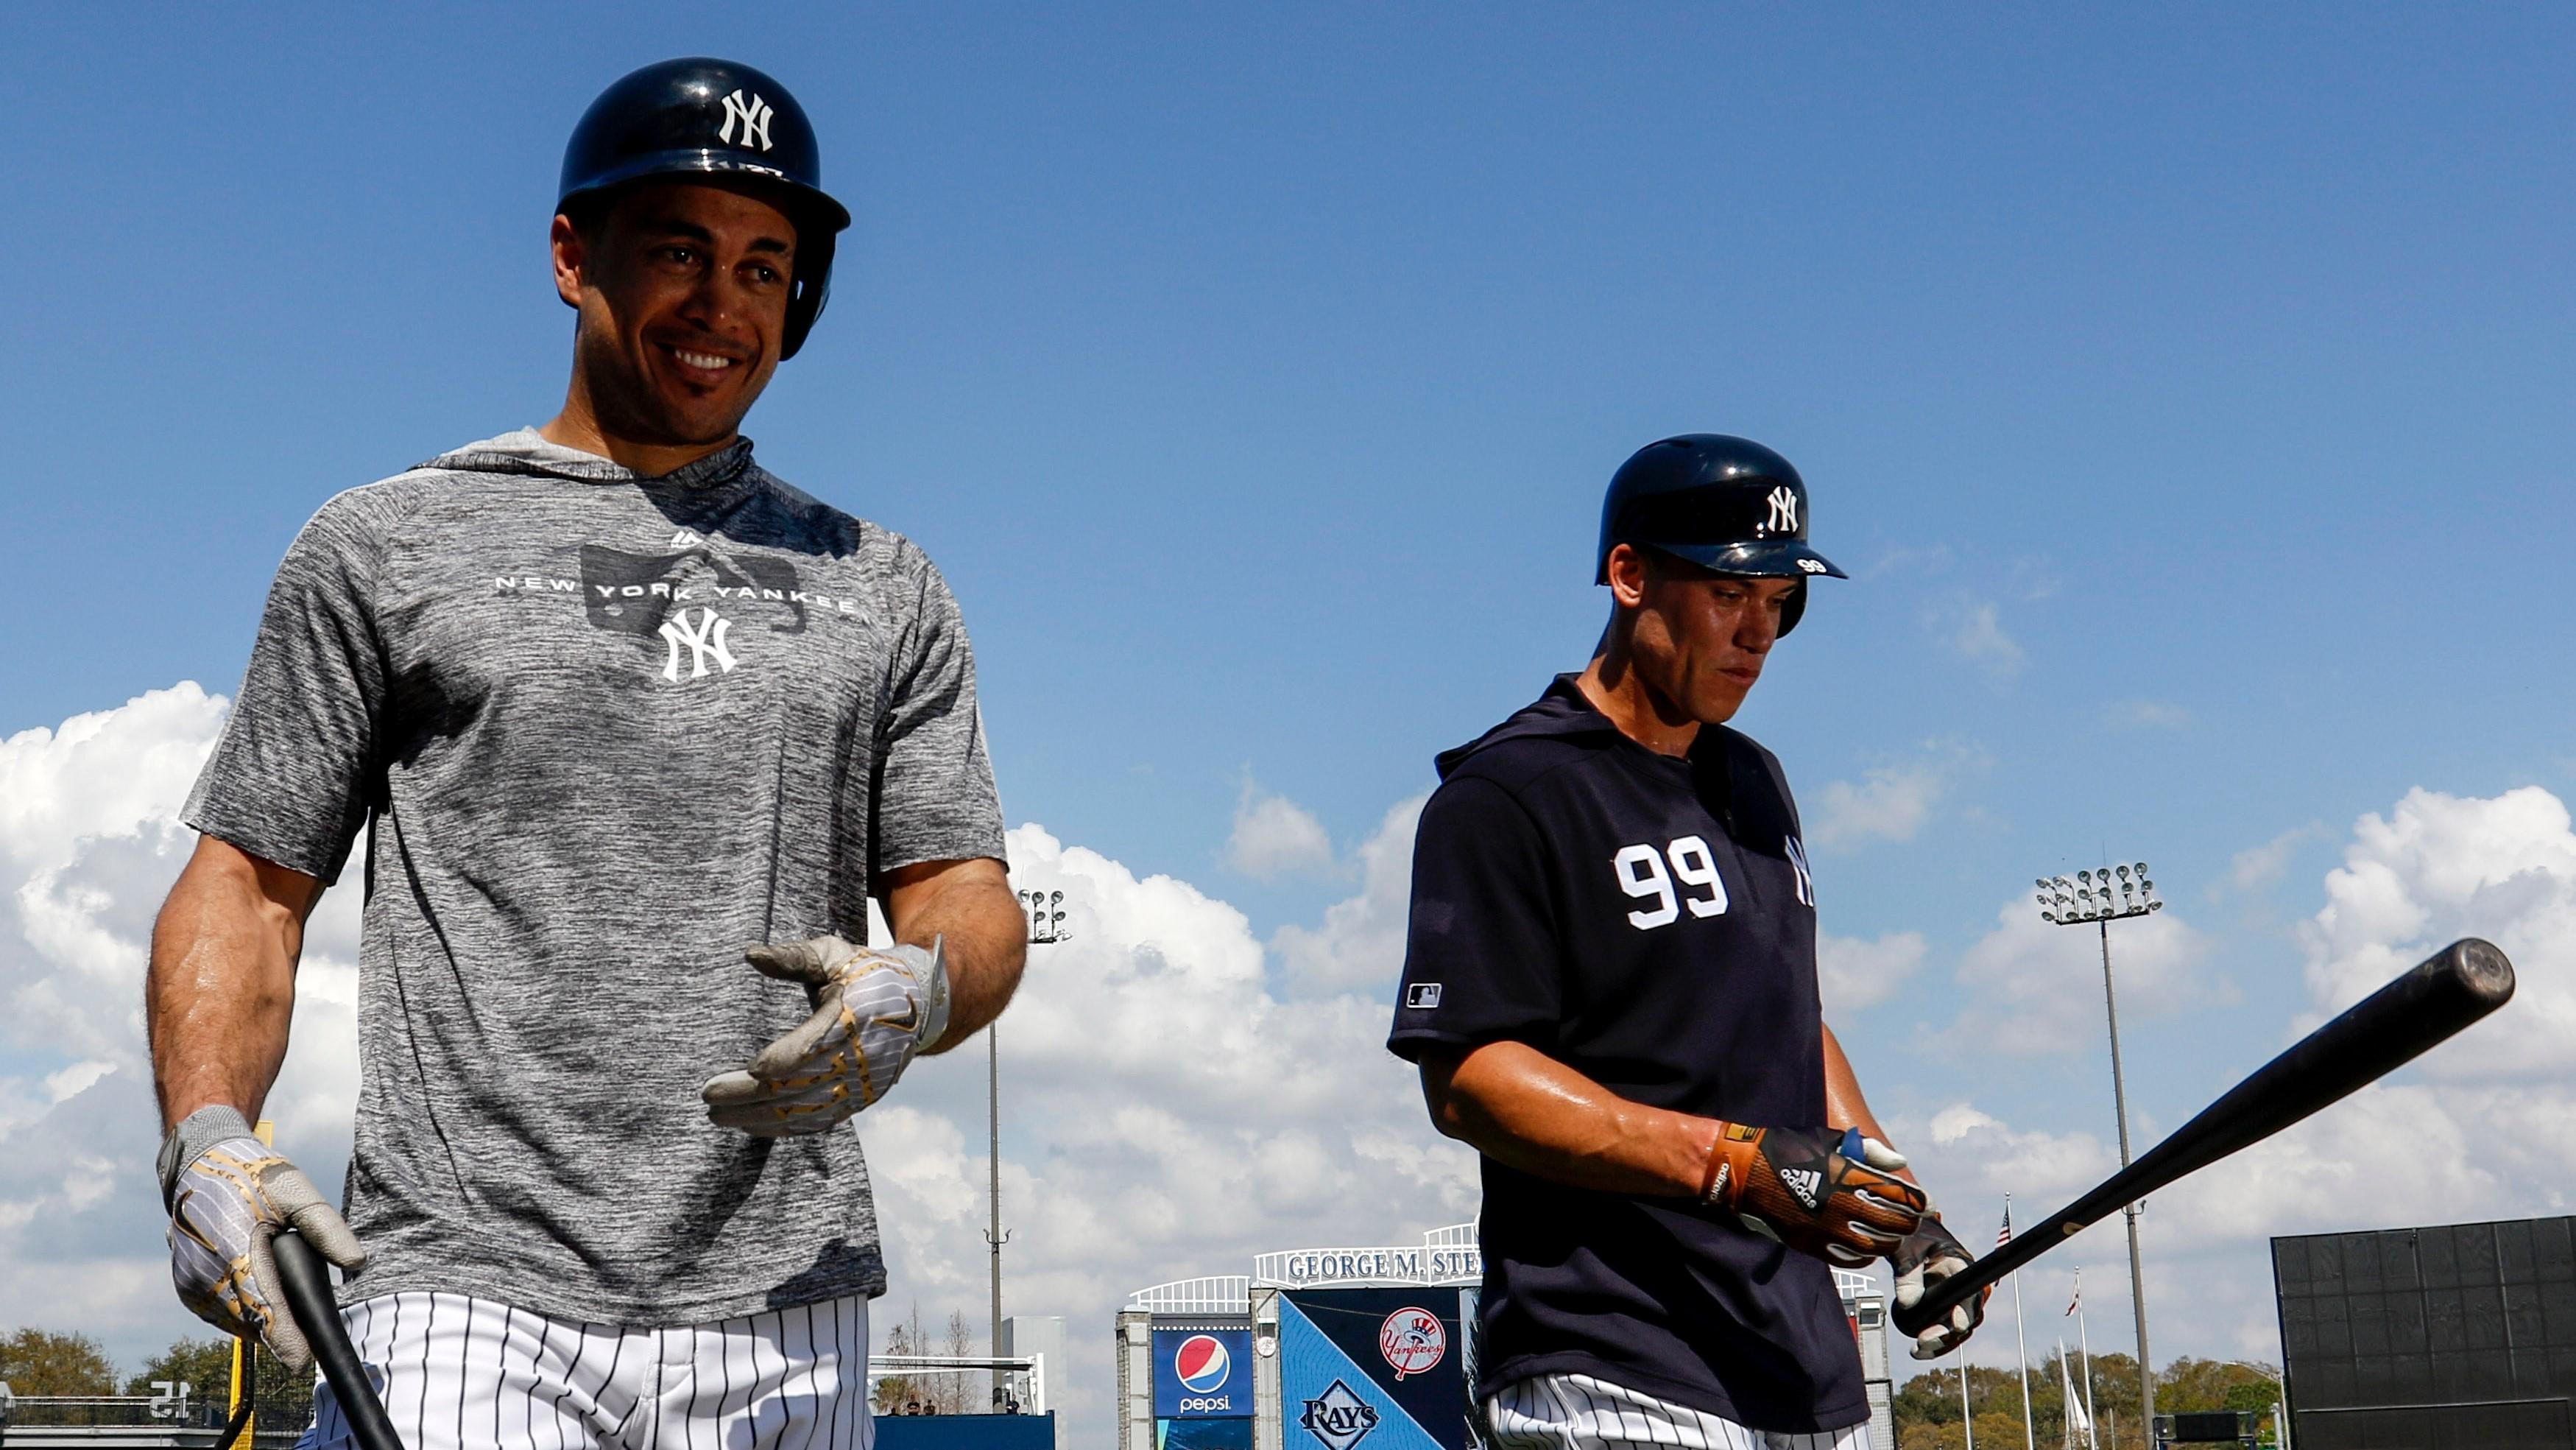 Feb 19, 2019; Tampa, FL, USA; New York Yankees left fielder Giancarlo Stanton (27) and right fielder Aaron Judge (99) walk off the field after batting practice during spring training at George M. Steinbrenner Field. Mandatory Credit: Butch Dill-USA TODAY Sports / © Butch Dill-USA TODAY Sports